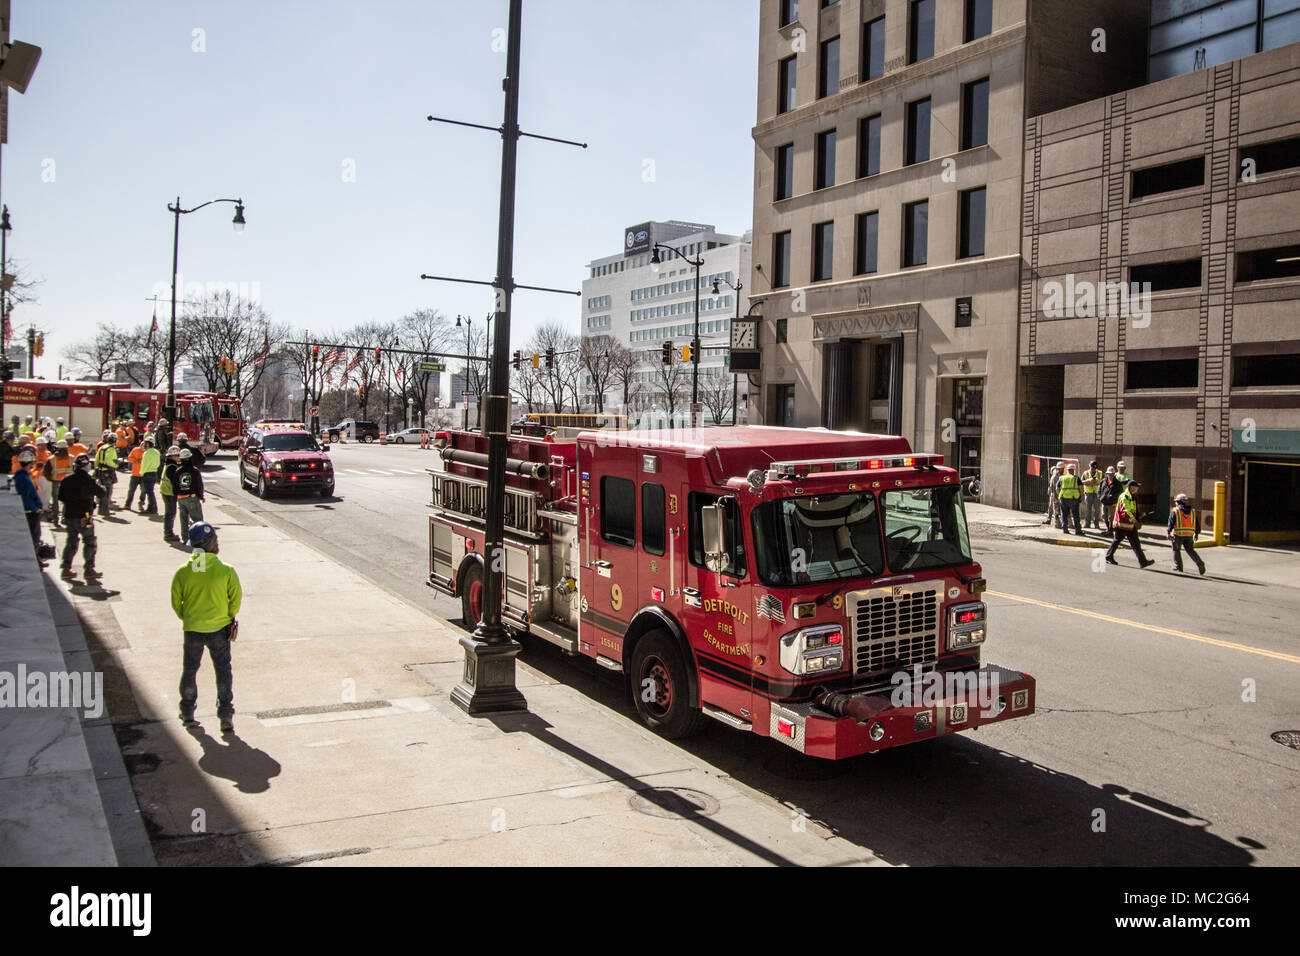 Detroit Fire Department truck parked on the city streets of downtown Detroit Michigan while responding to a call. Detroit is Michigan's largest city. Stock Photo